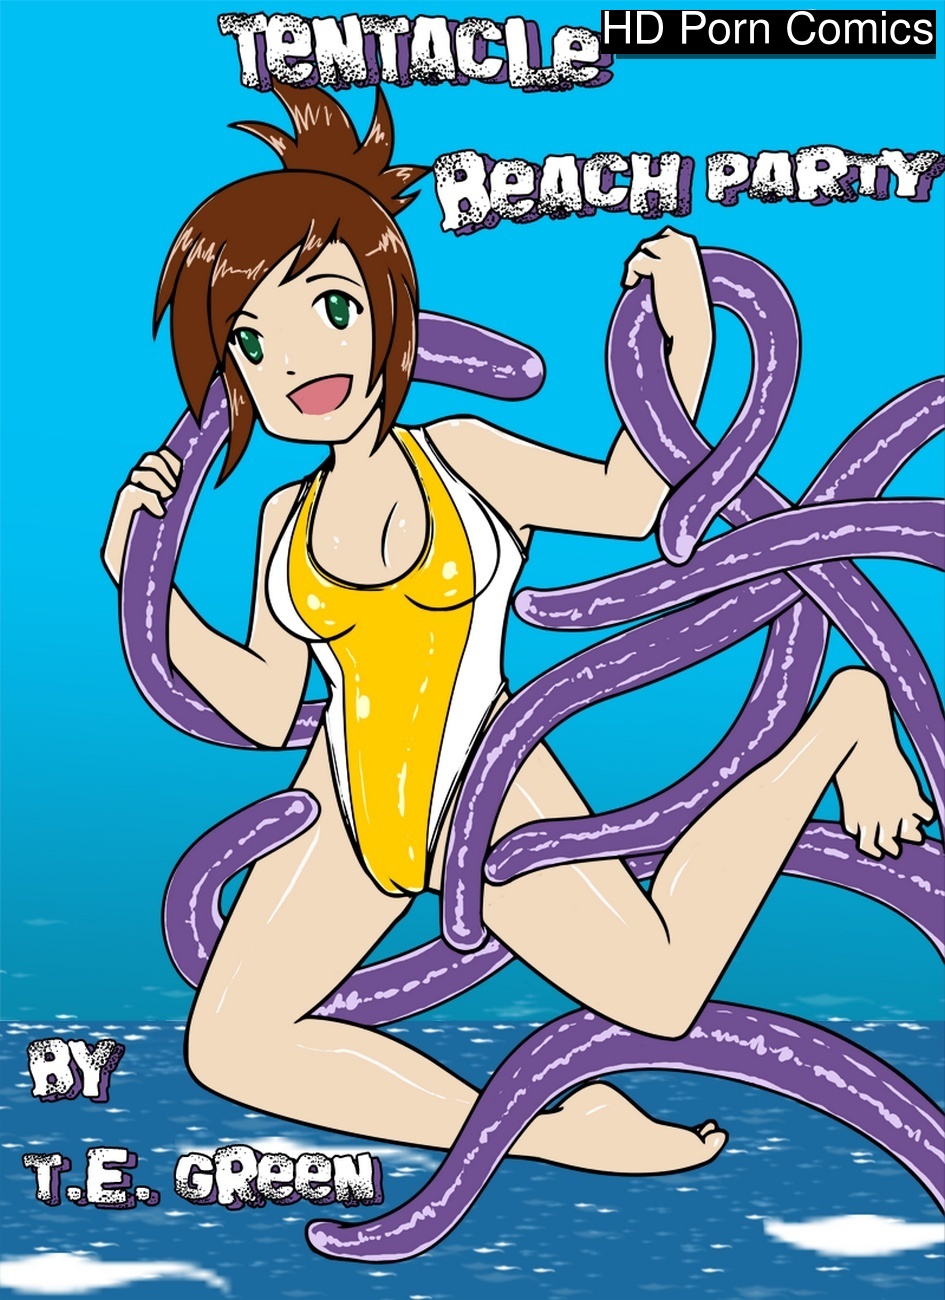 Beach Group Sex Porn Furry - A Date With A Tentacle Monster 2 - Tentacle Beach Party Sex Comic - HD Porn  Comics